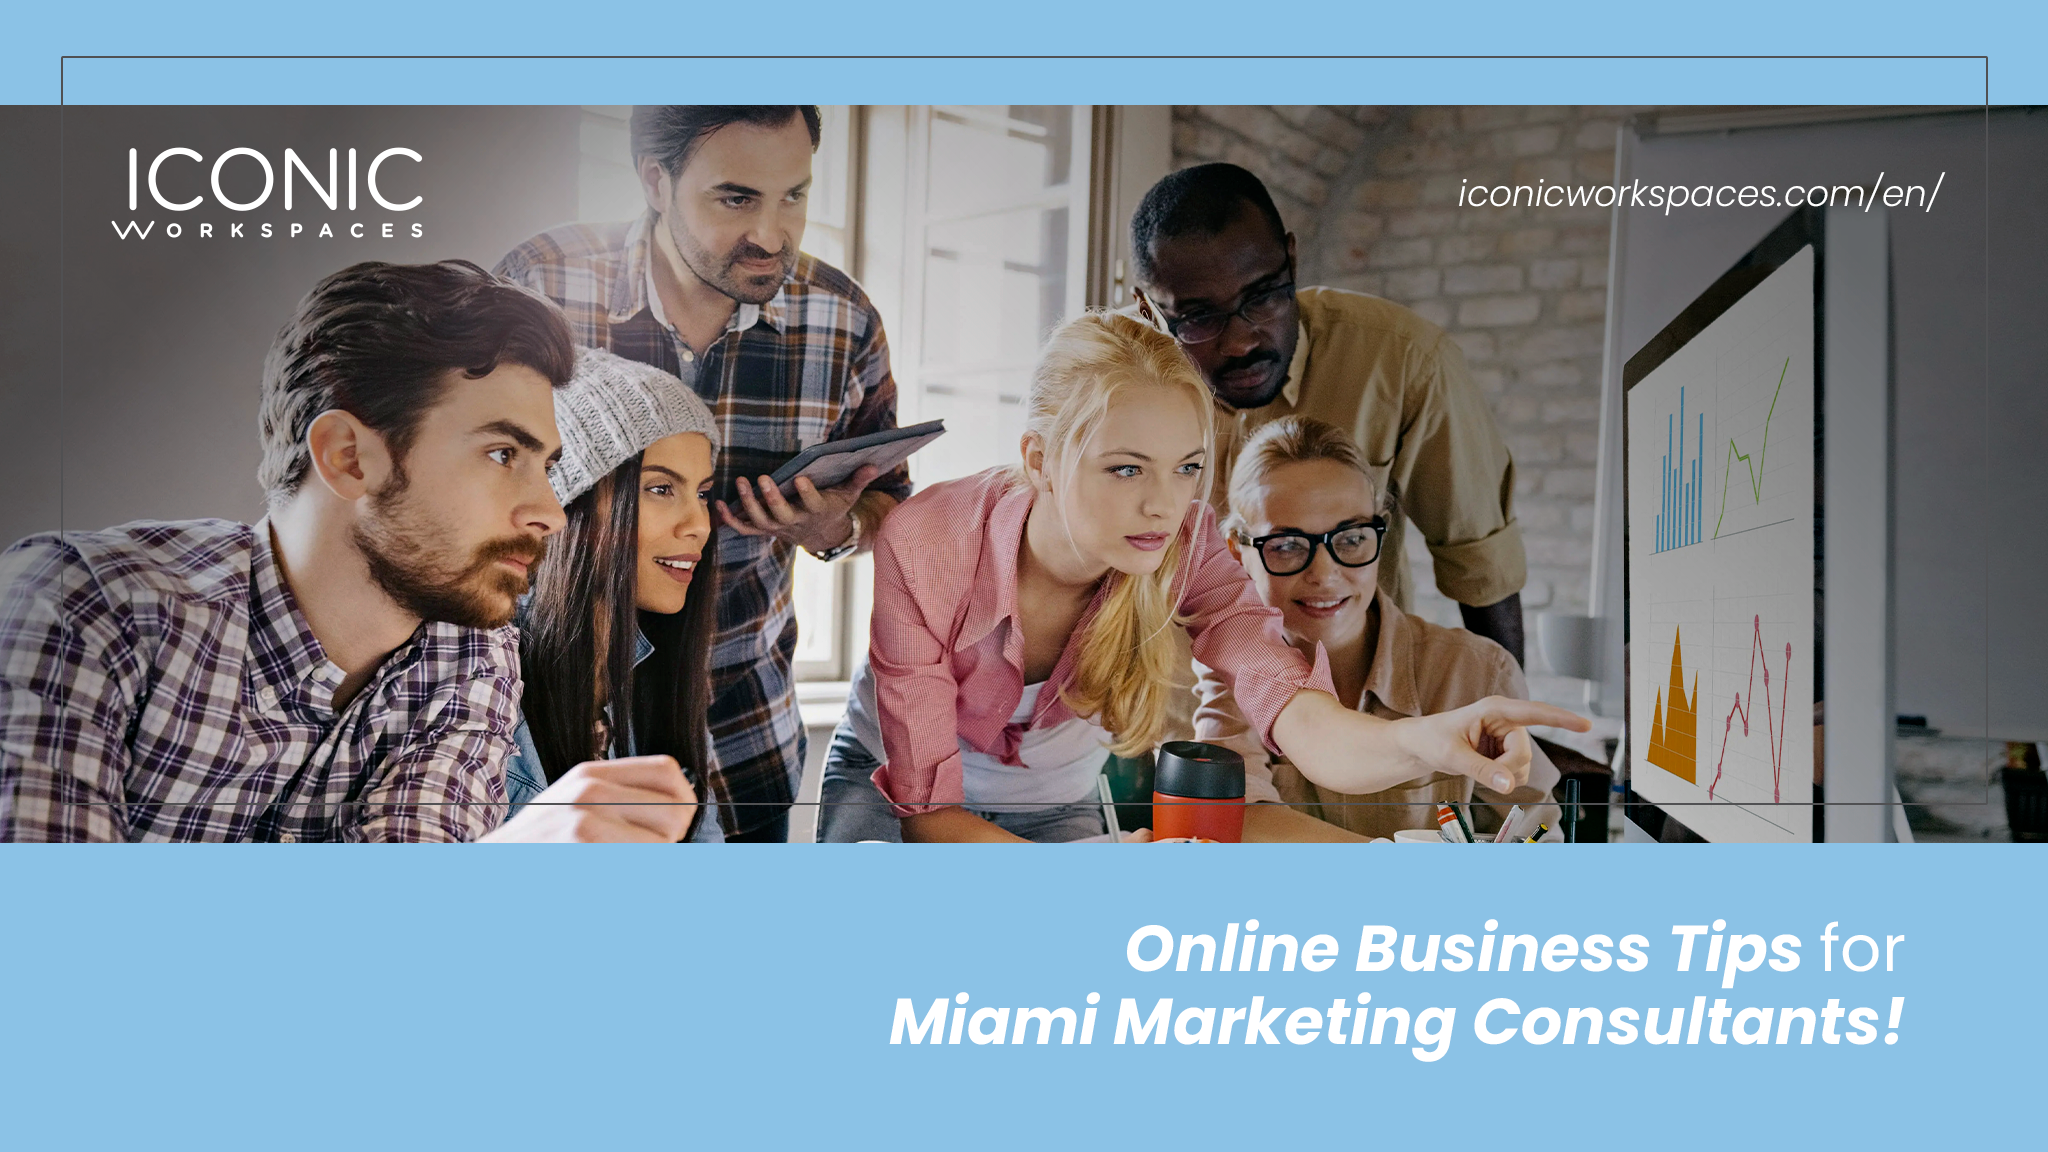 Online Business Tips for Miami Marketing Consultants: Navigating the Digital Landscape